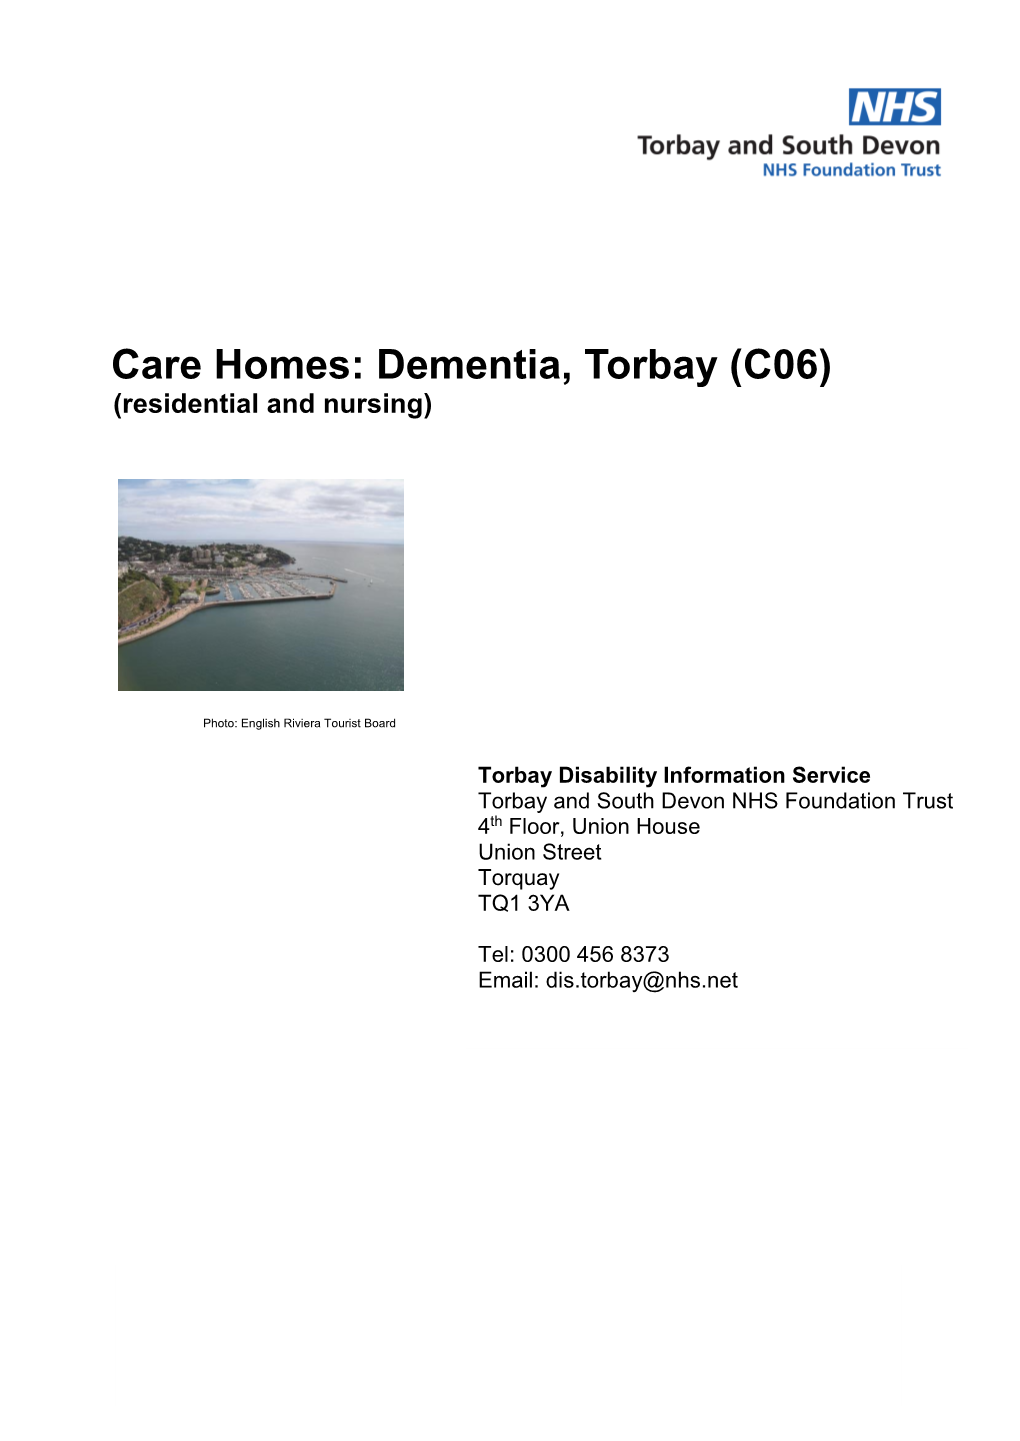 Care Homes: Dementia (Residential and Nursing), Torbay (C06)